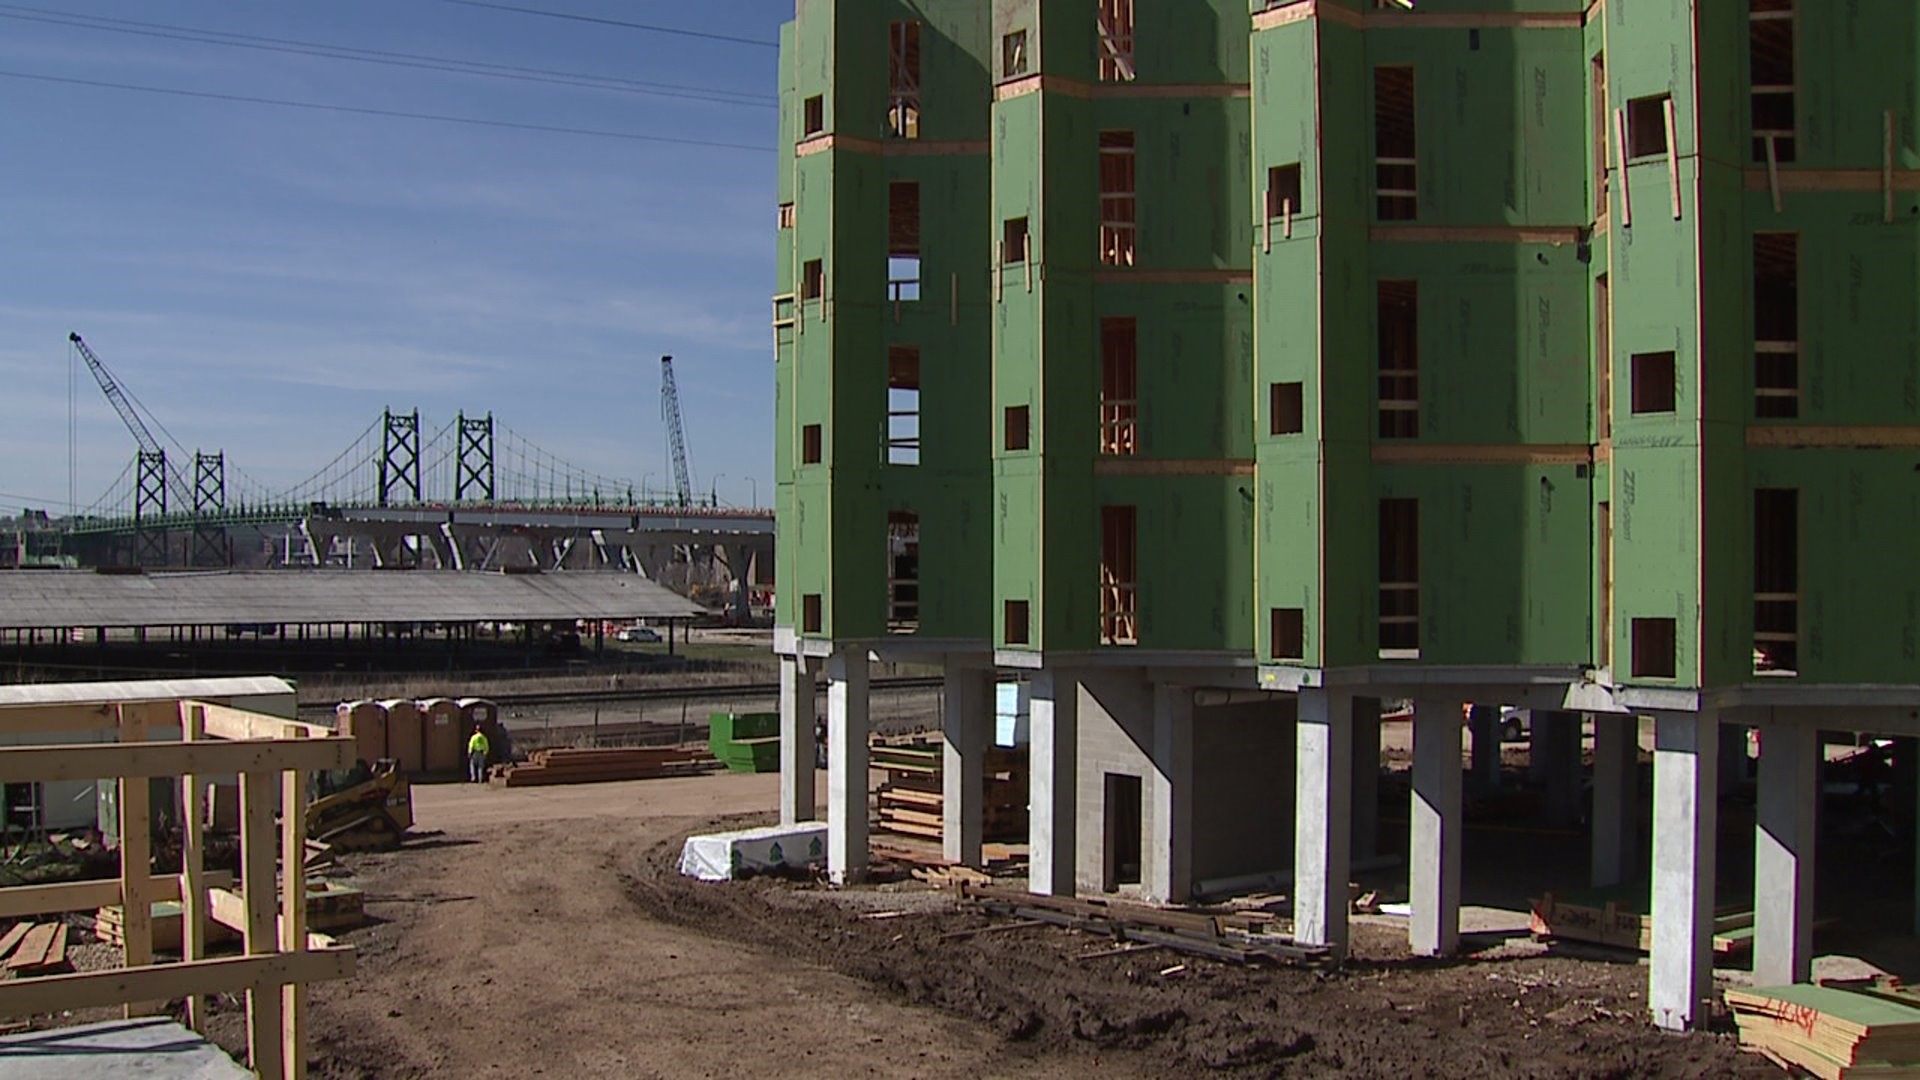 The Bridges apartments in Bettendorf constructing second building before first opens